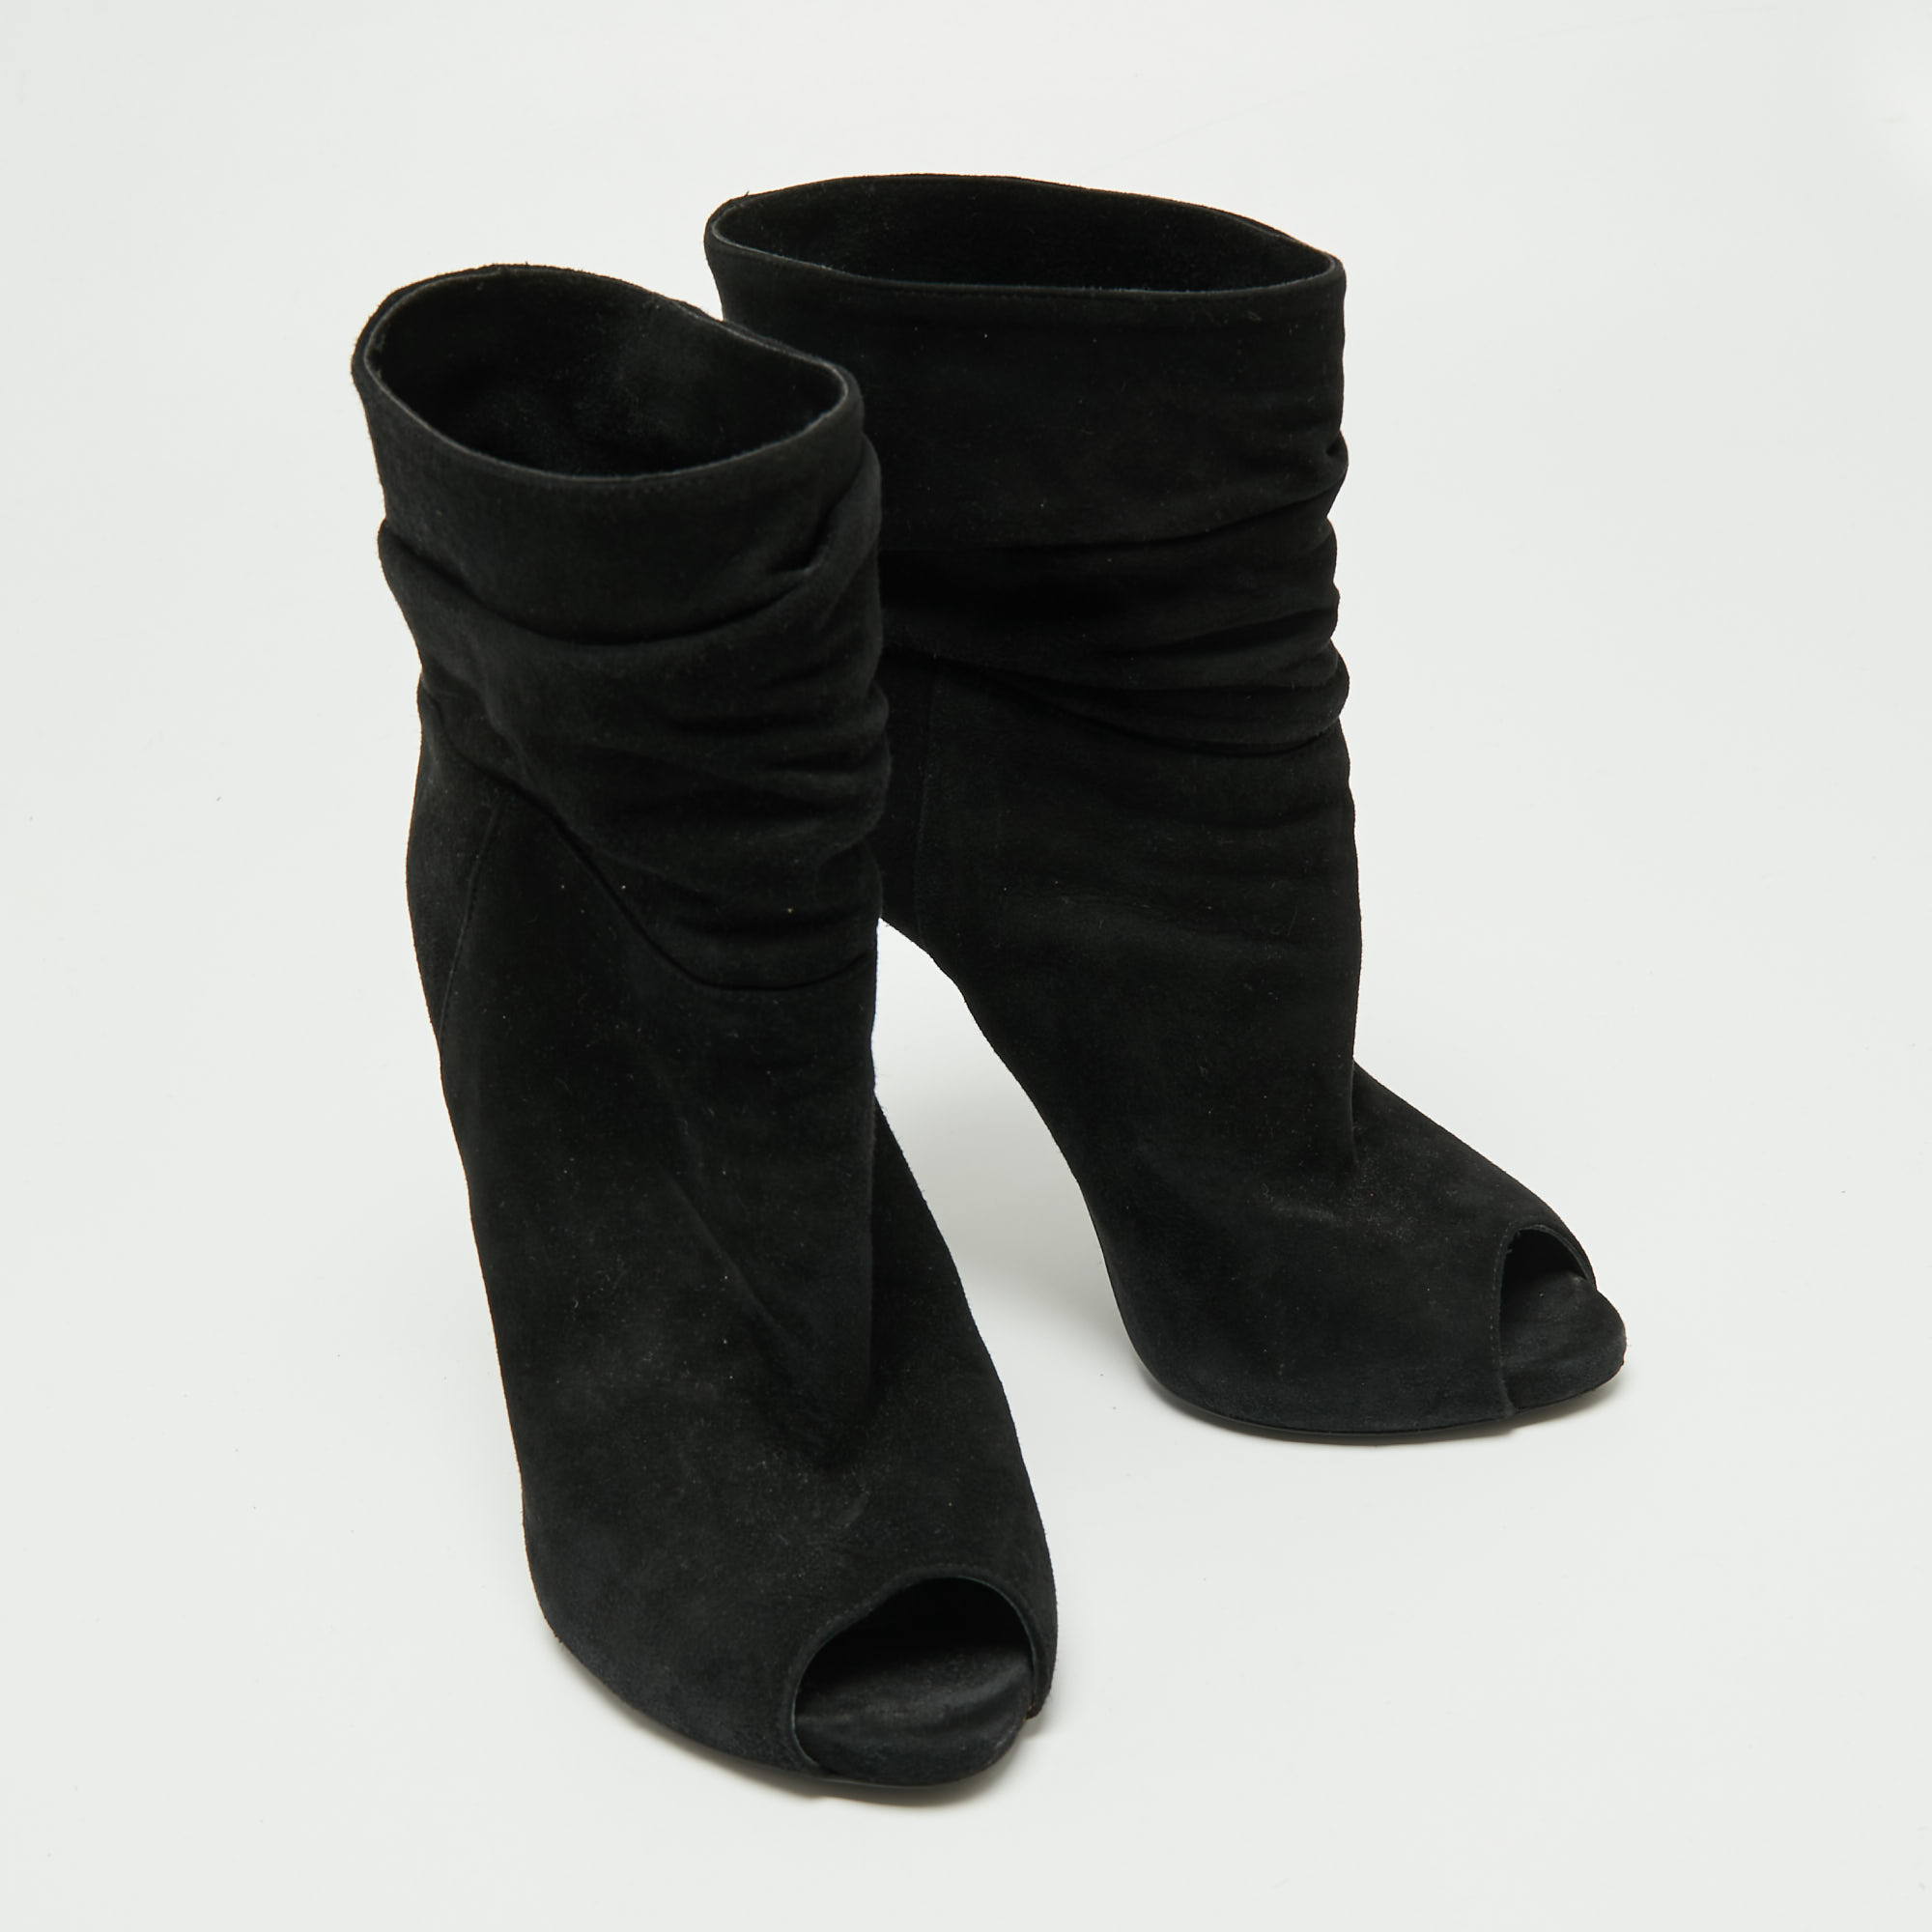 Le Silla Black Suede Peep-Toe Spiral Heel Ankle Boots Size 37.5